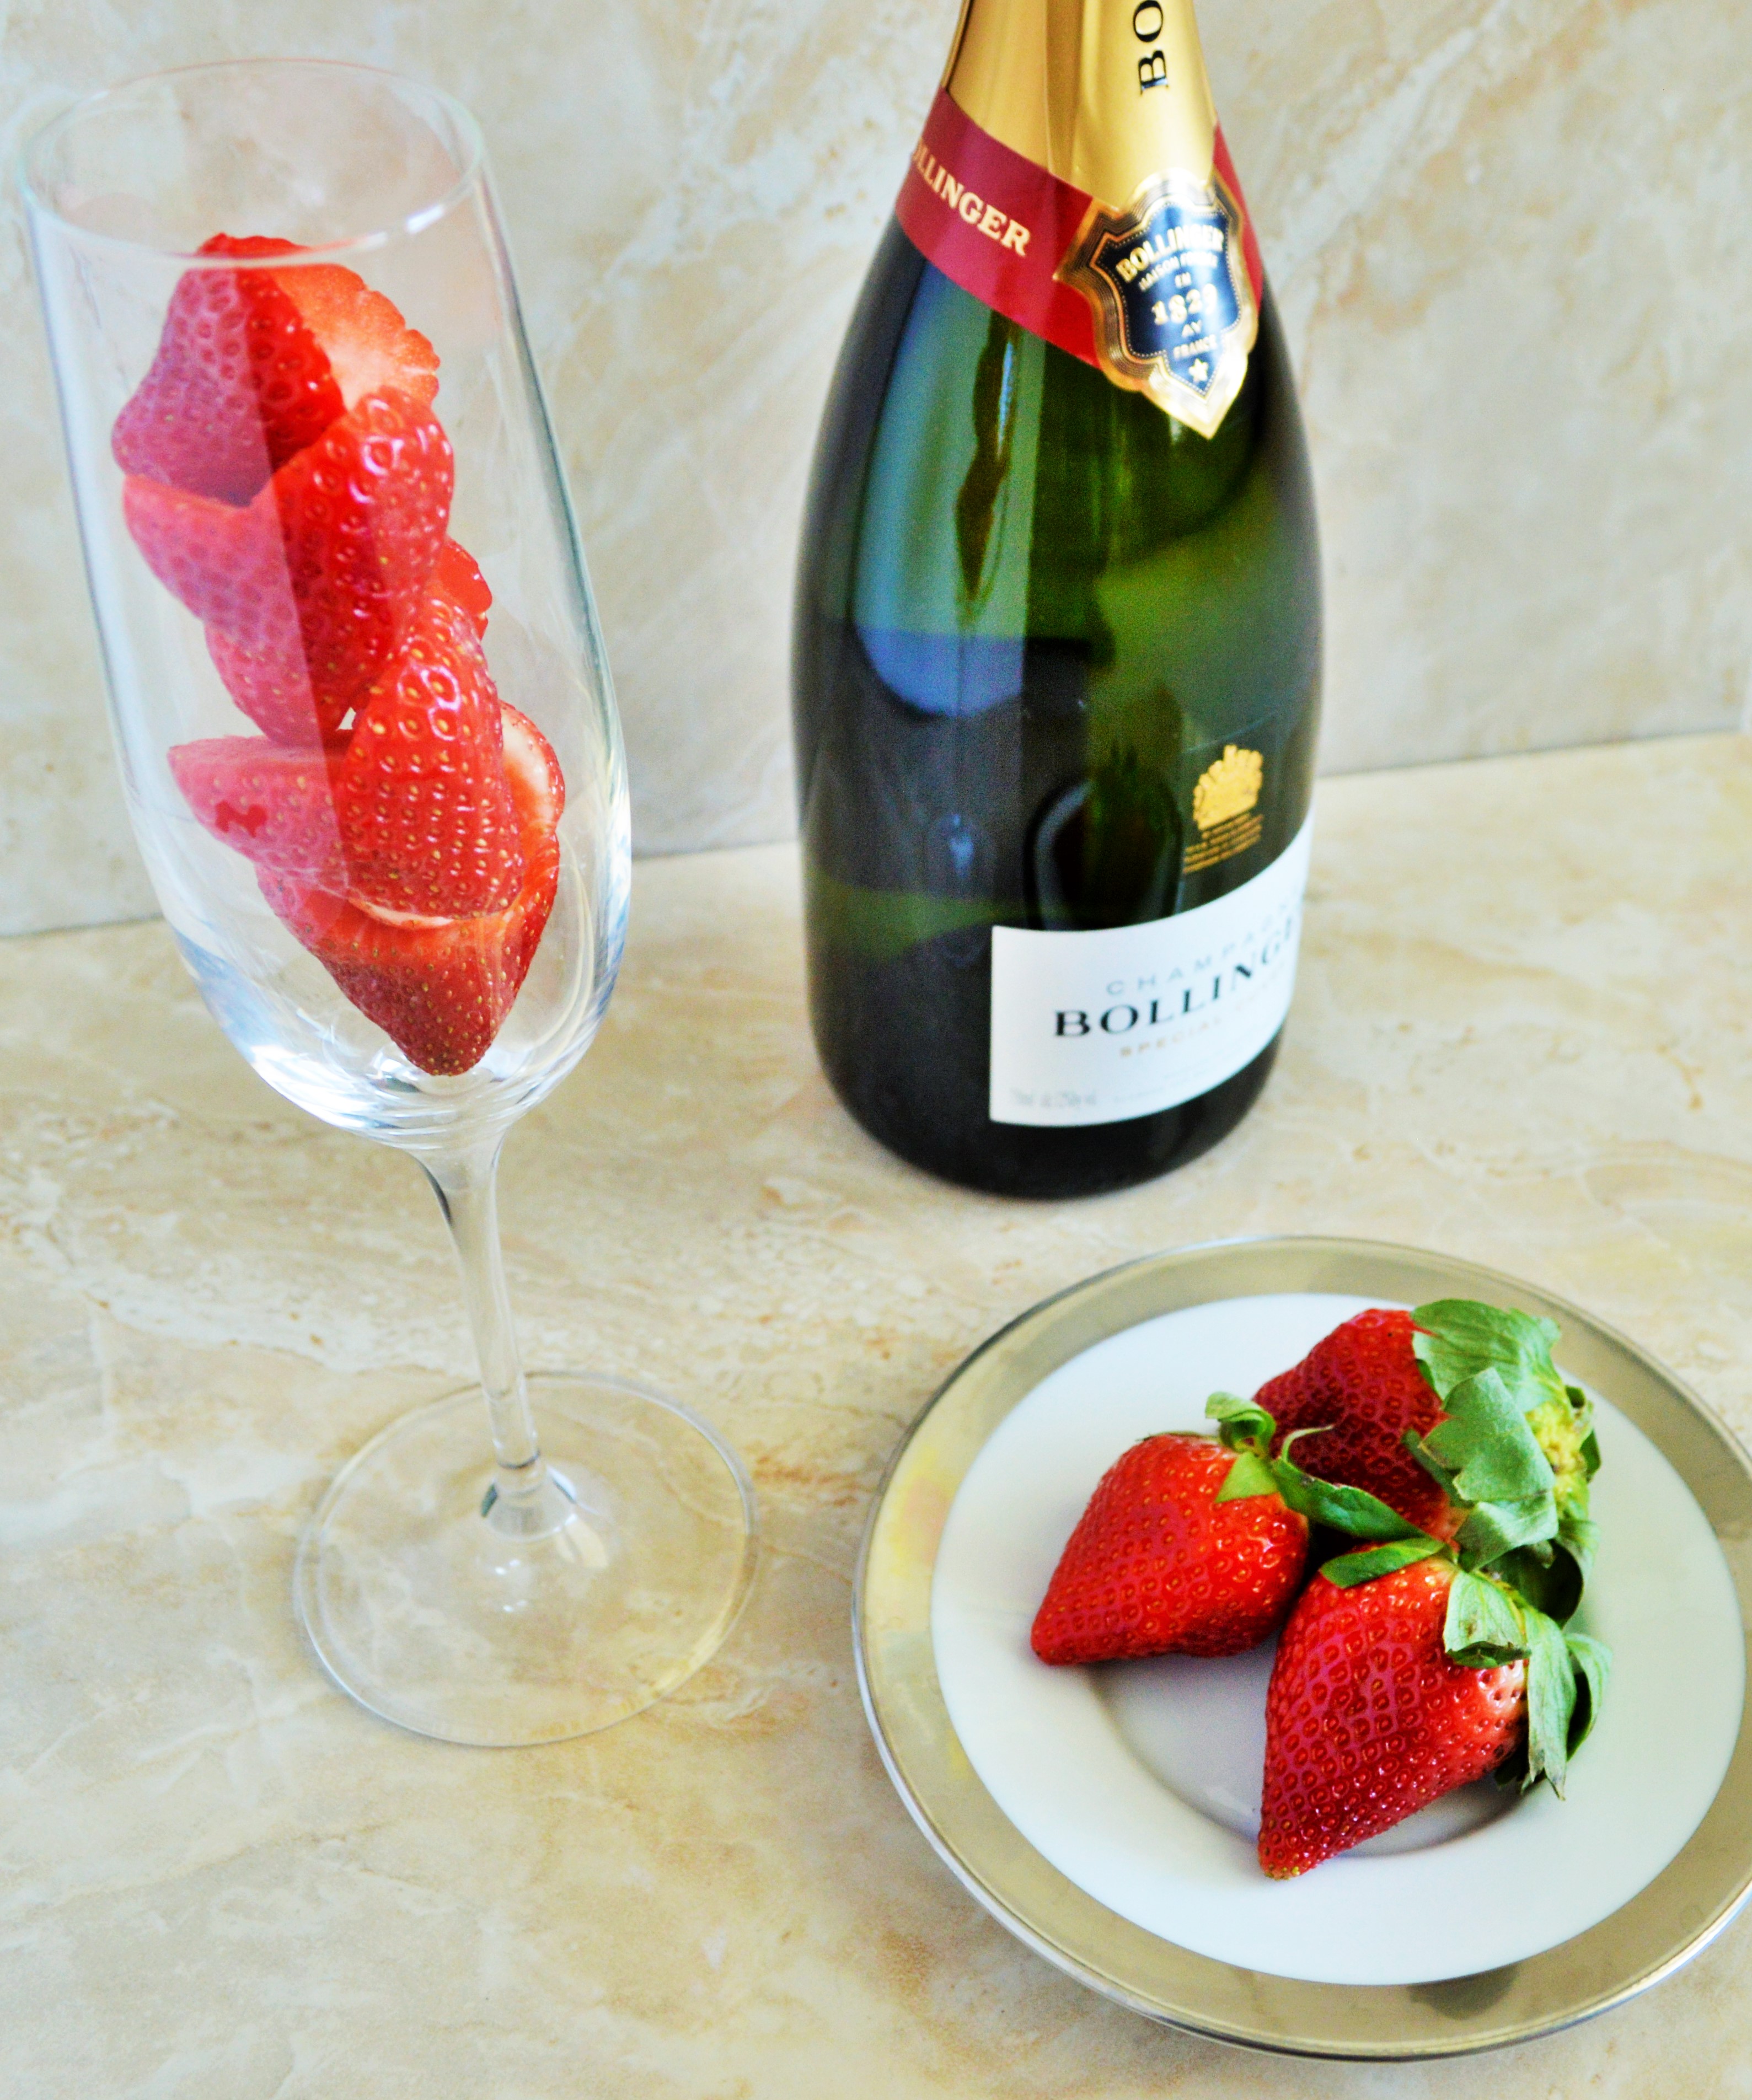 Strawberries and Champagne